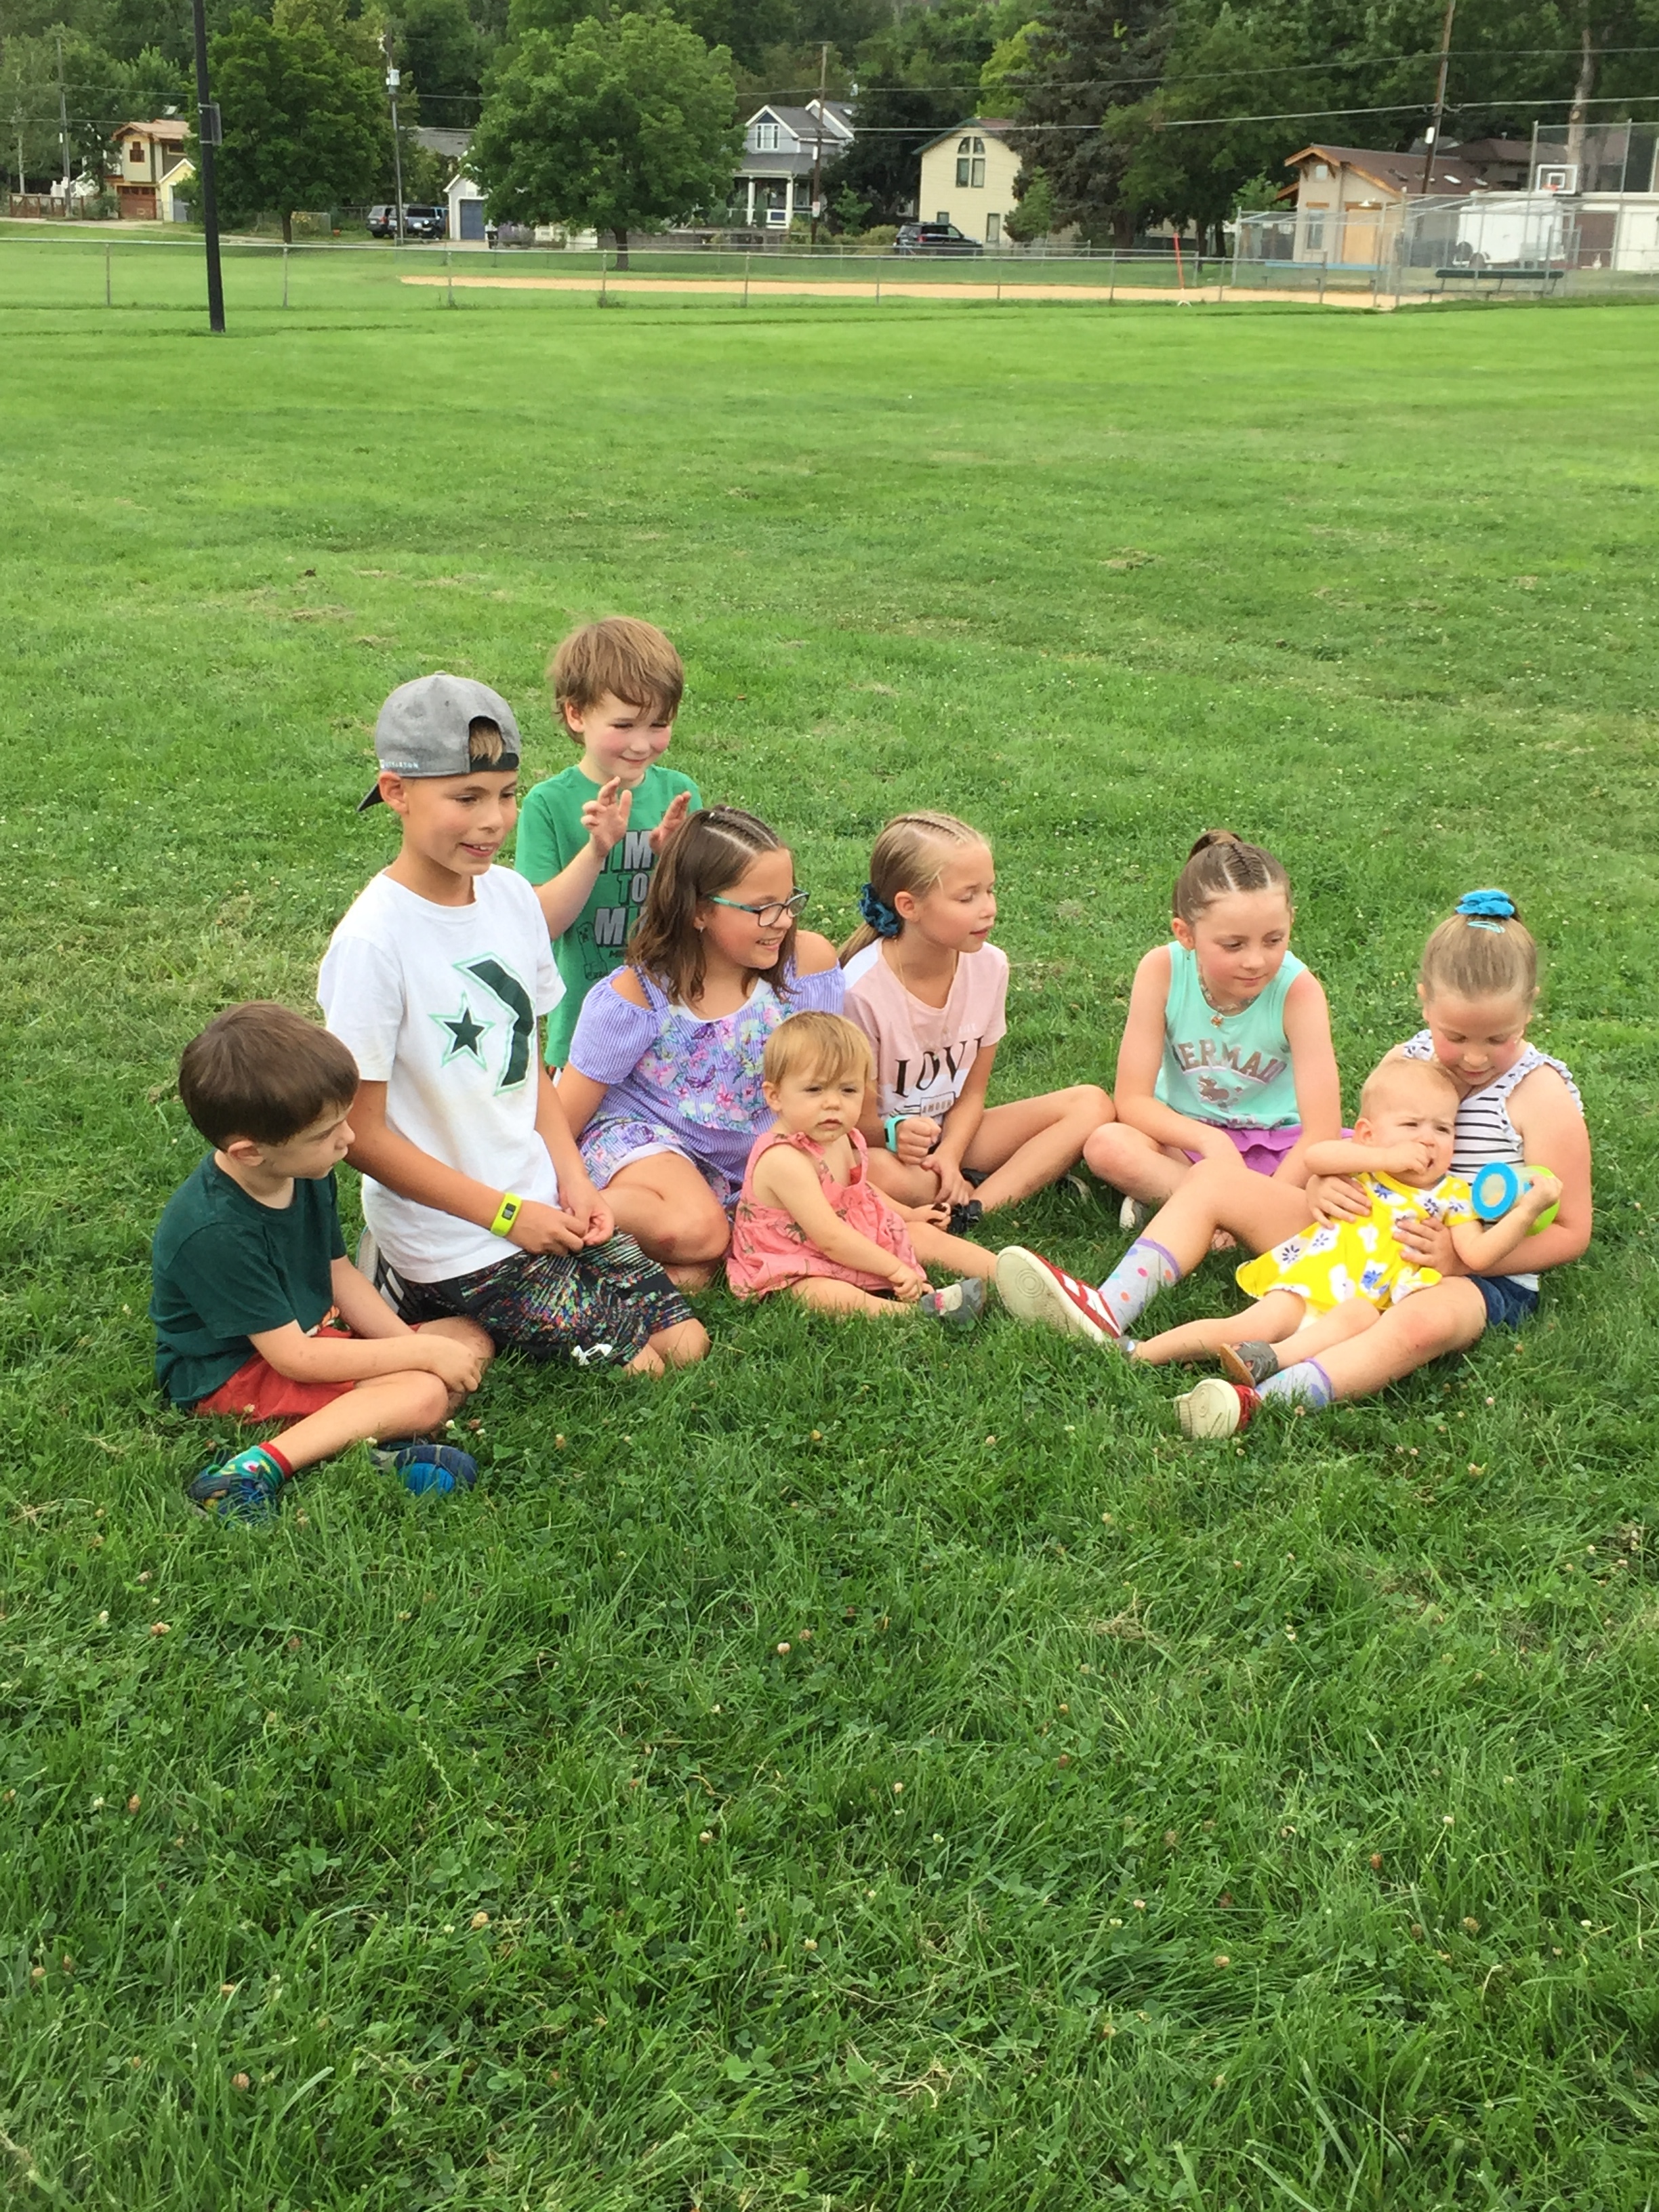 Our grandkids and great-nieces and nephews at family picnic.